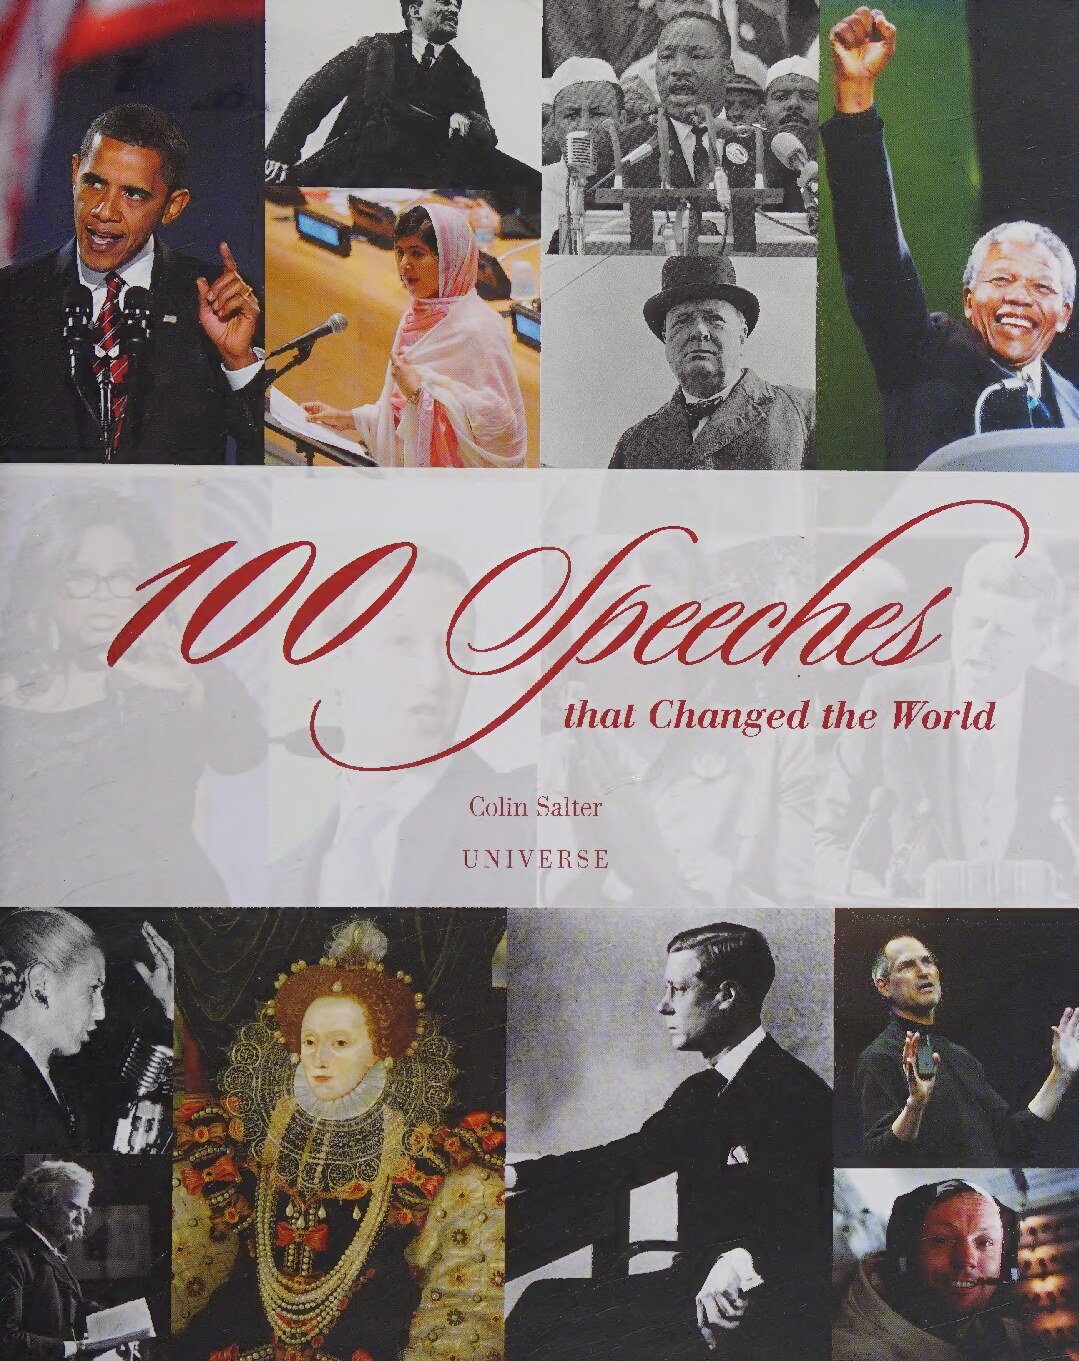 100 speeches that changed the world